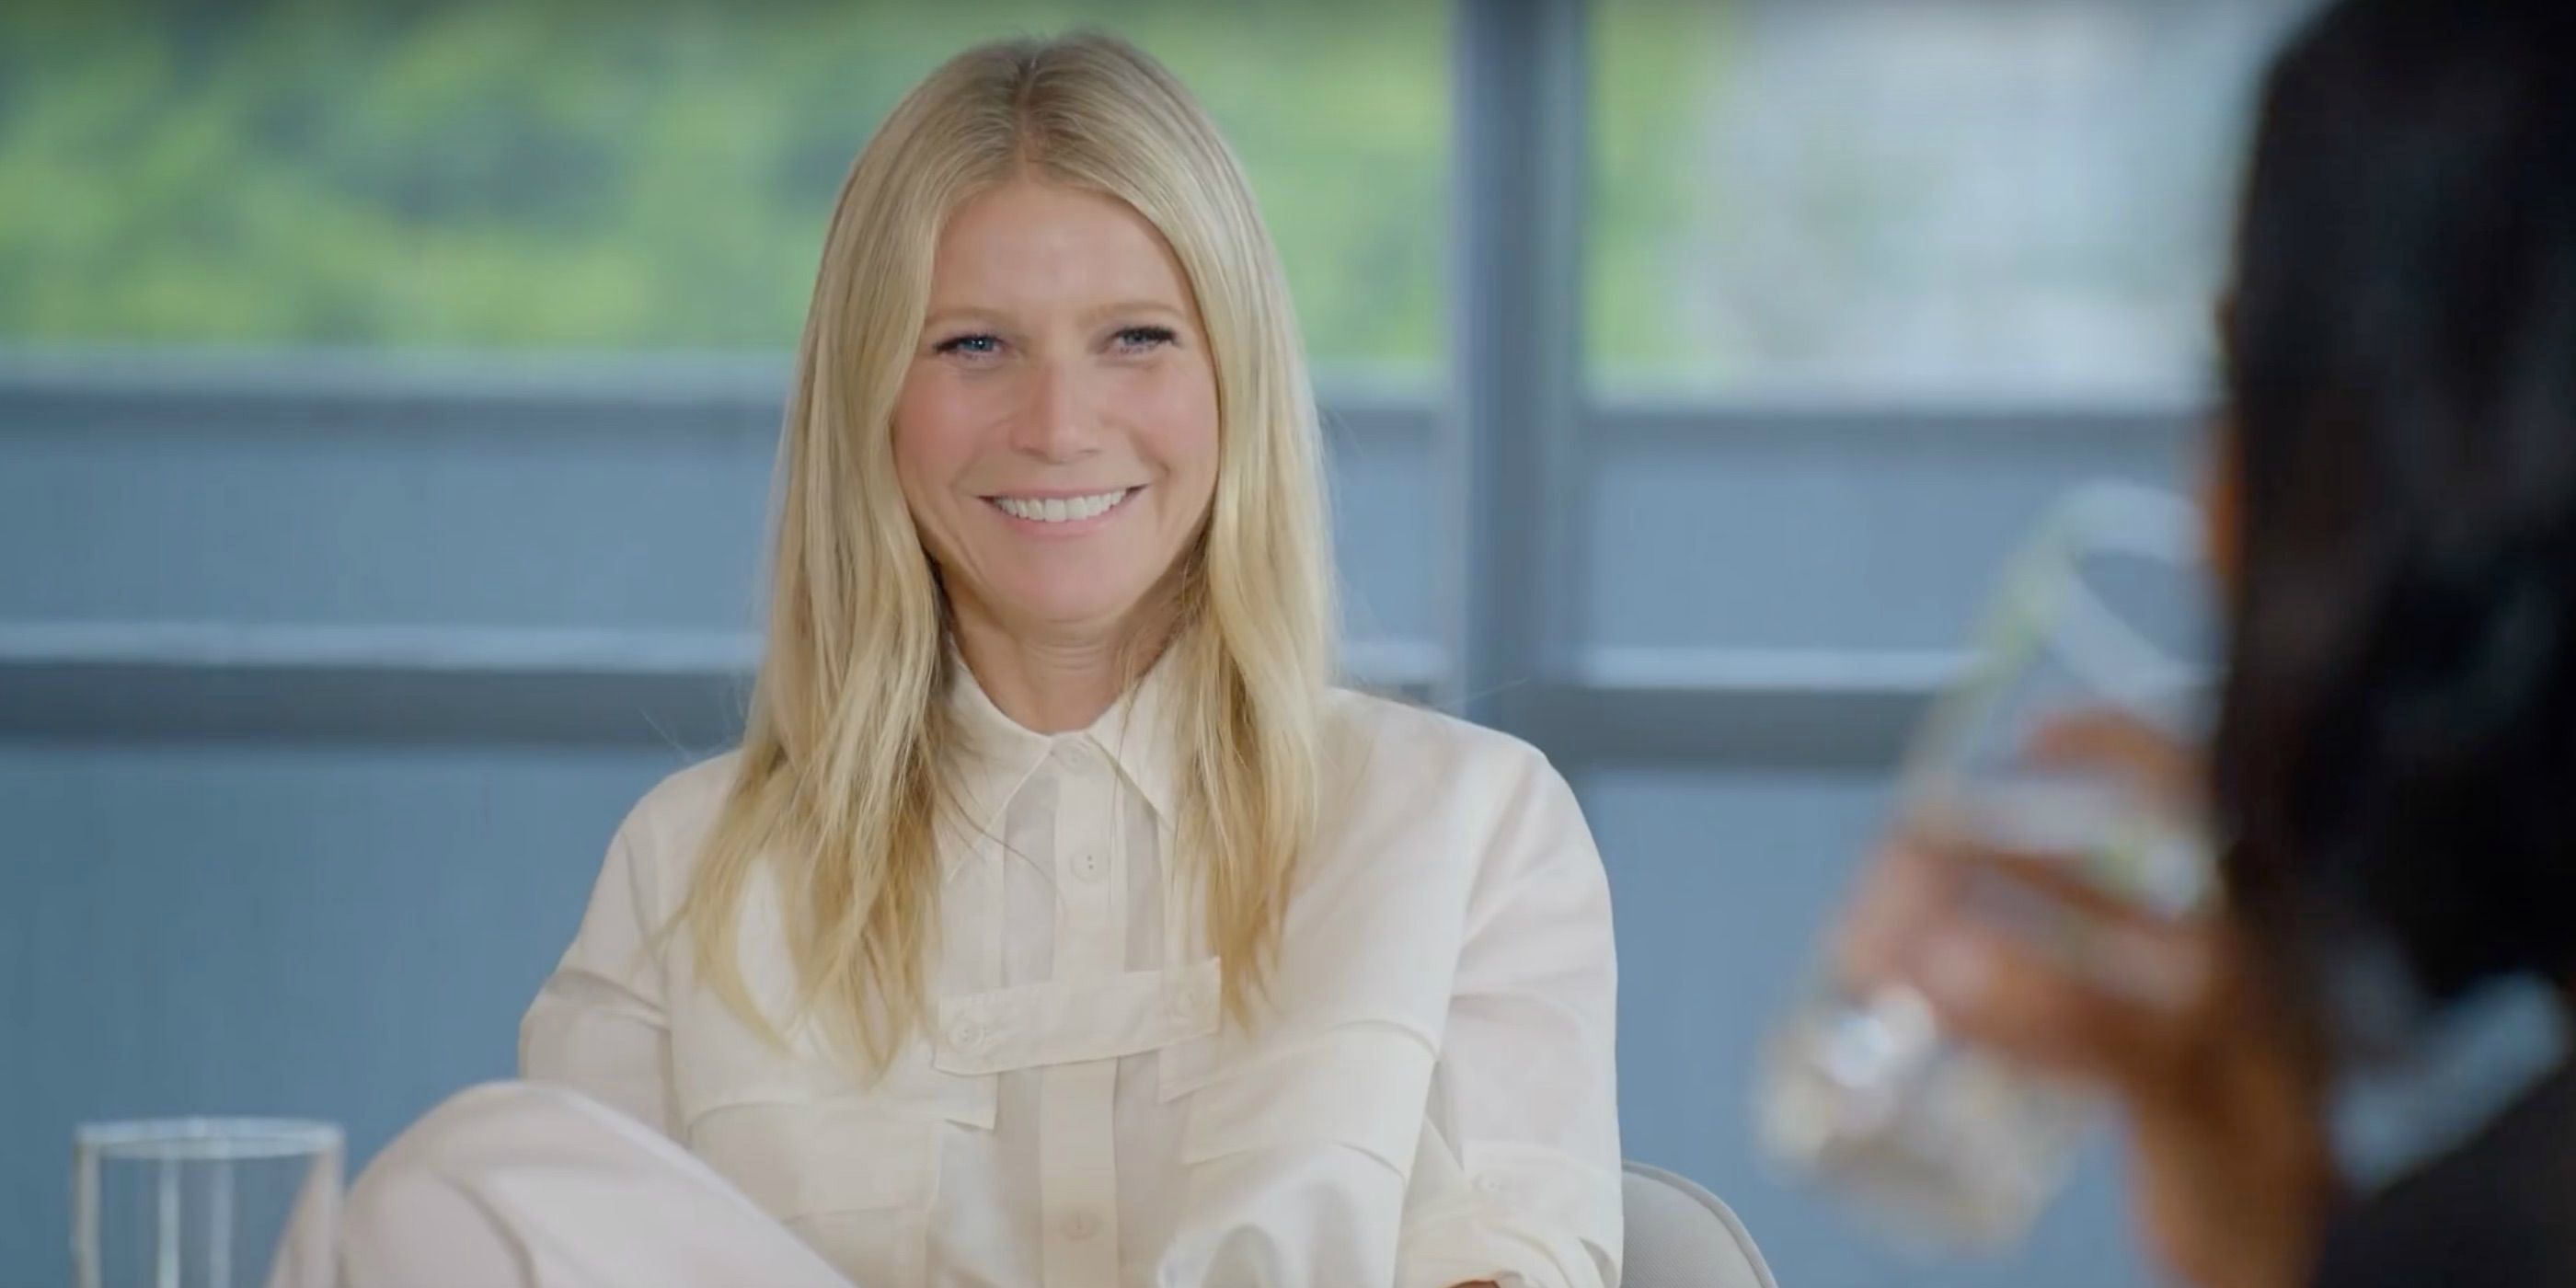 Netflix Giving Gwyneth Paltrow’s Goop Lab A TV Show Is Irresponsible